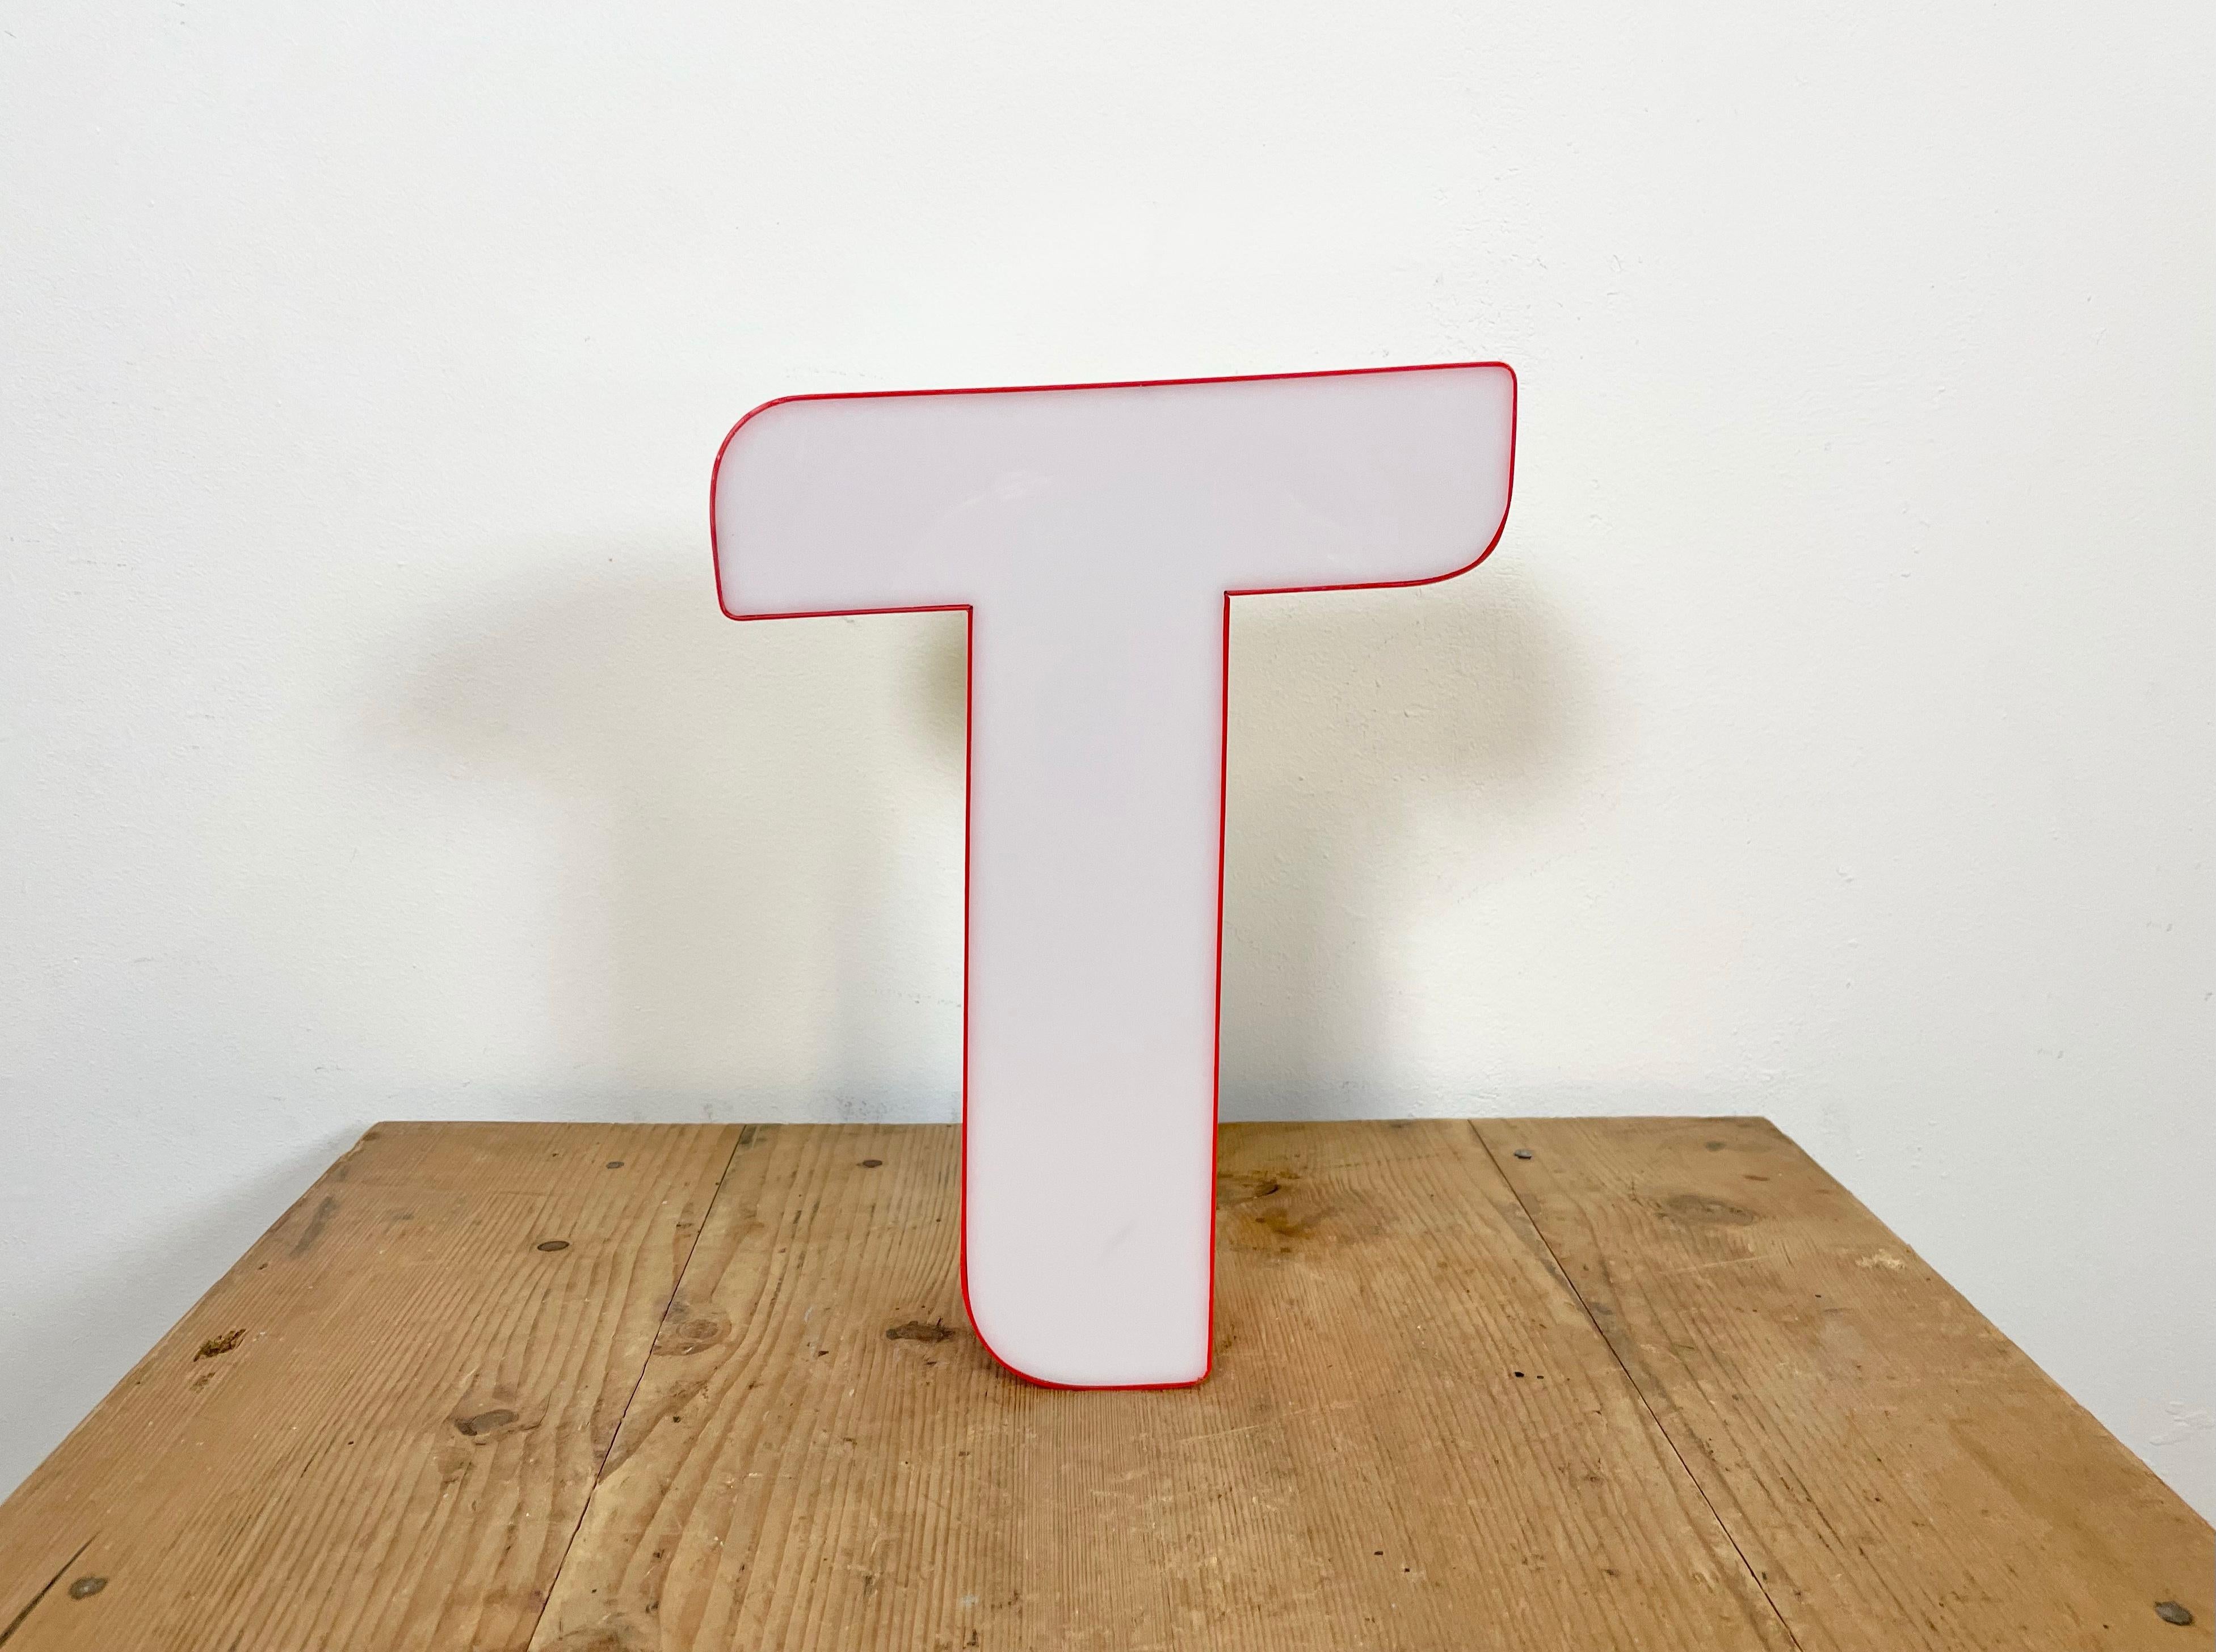 This vintage industrial red plastic illuminated letter R was made in Italy during the 1970s and comes from the old advertising banner. The letter can be used as a table lamp or wall lamp.The weight of the letter is 1 kg.